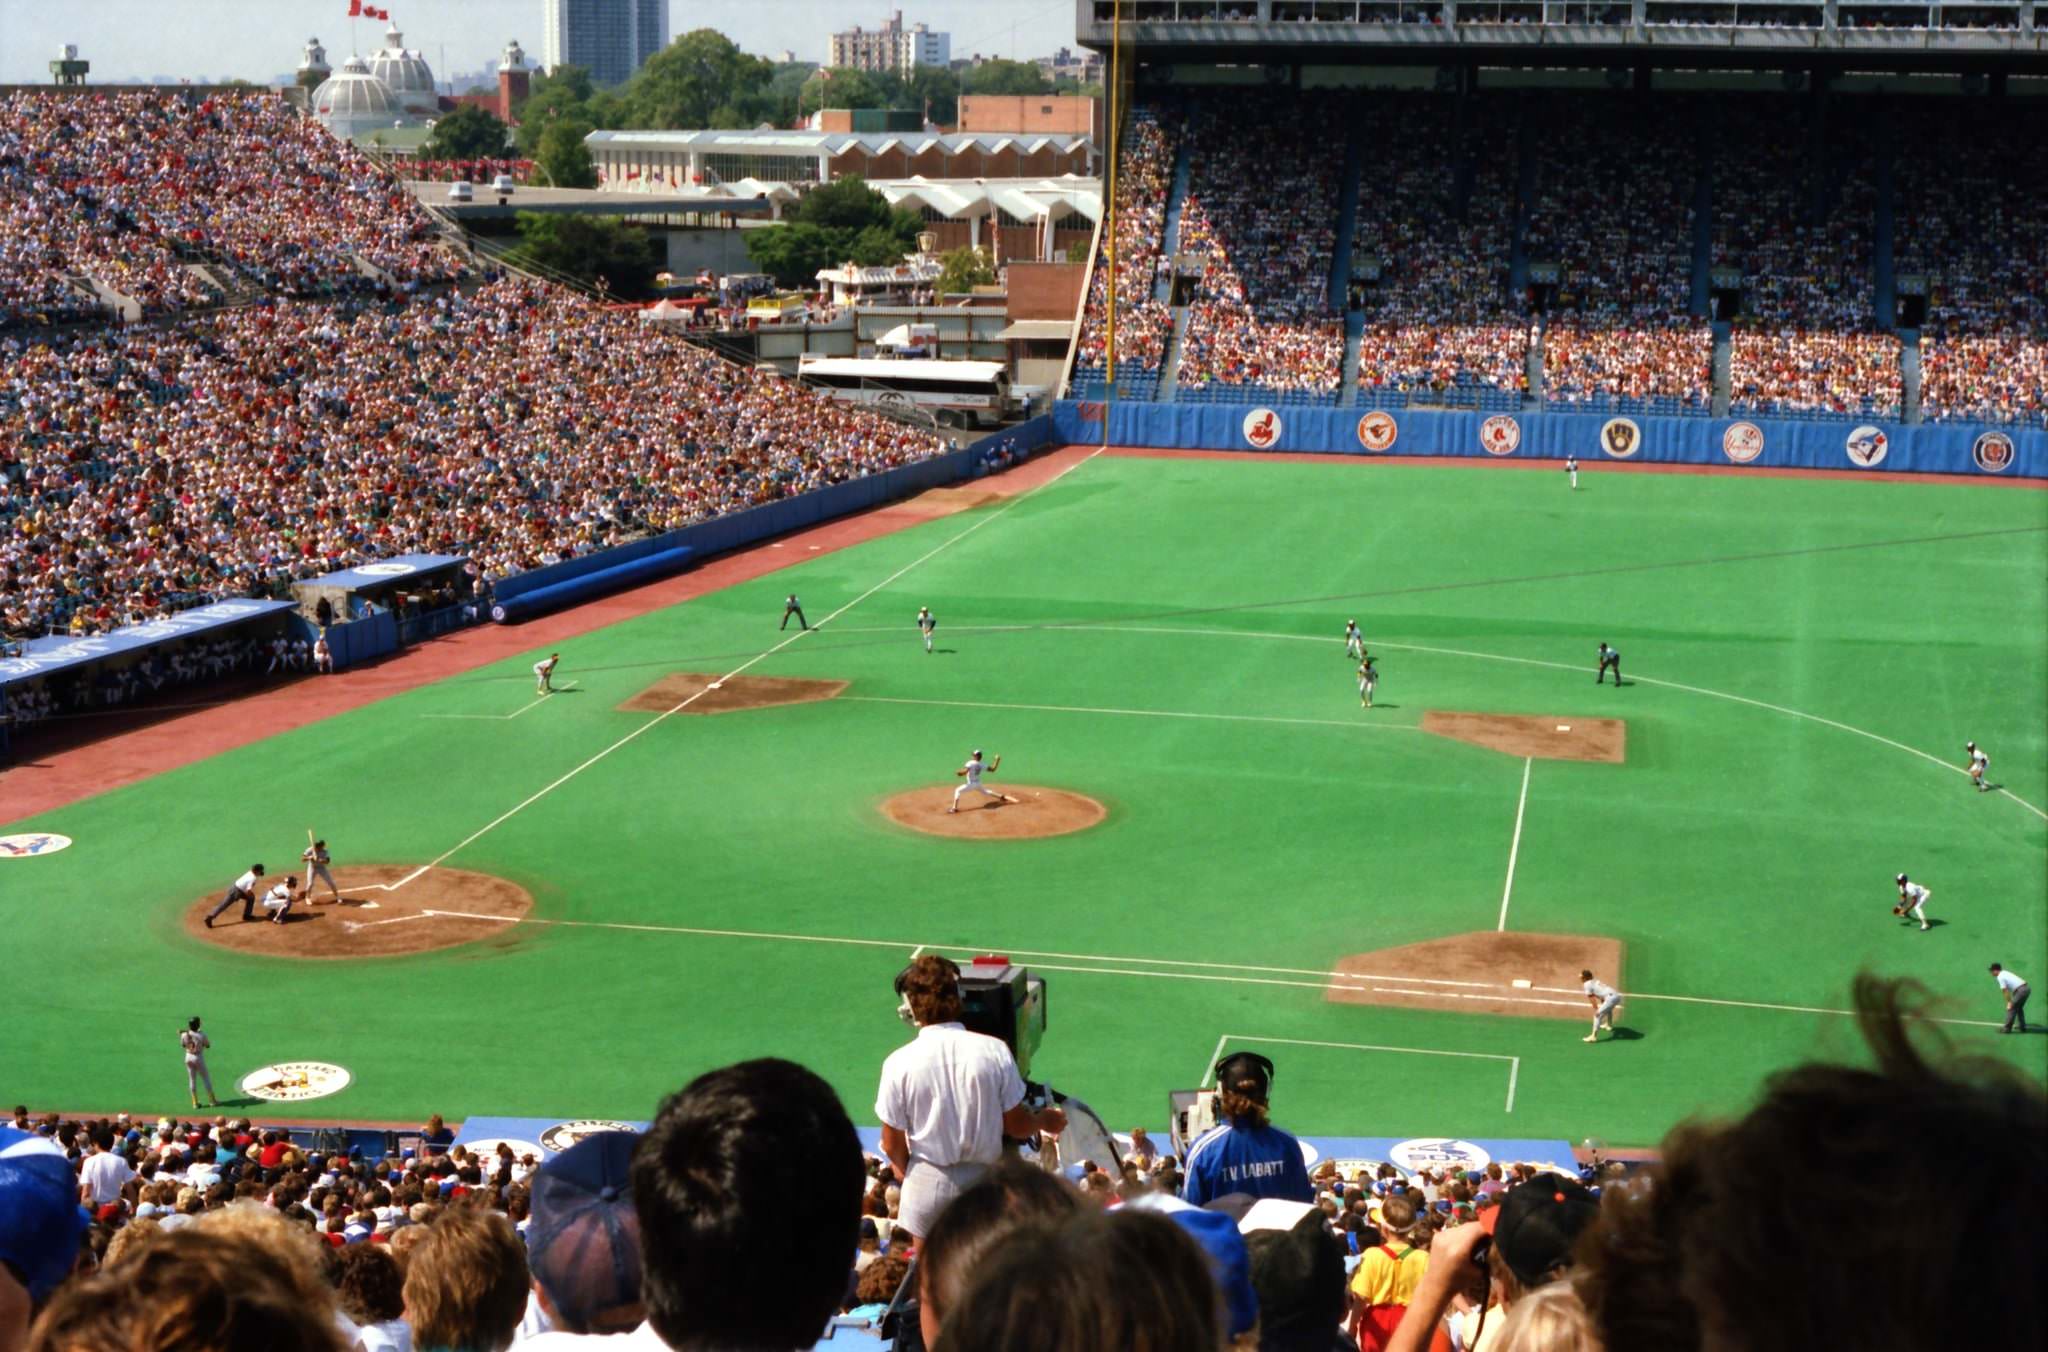 The Blue Jays playing at Exhibition Stadium, 1987